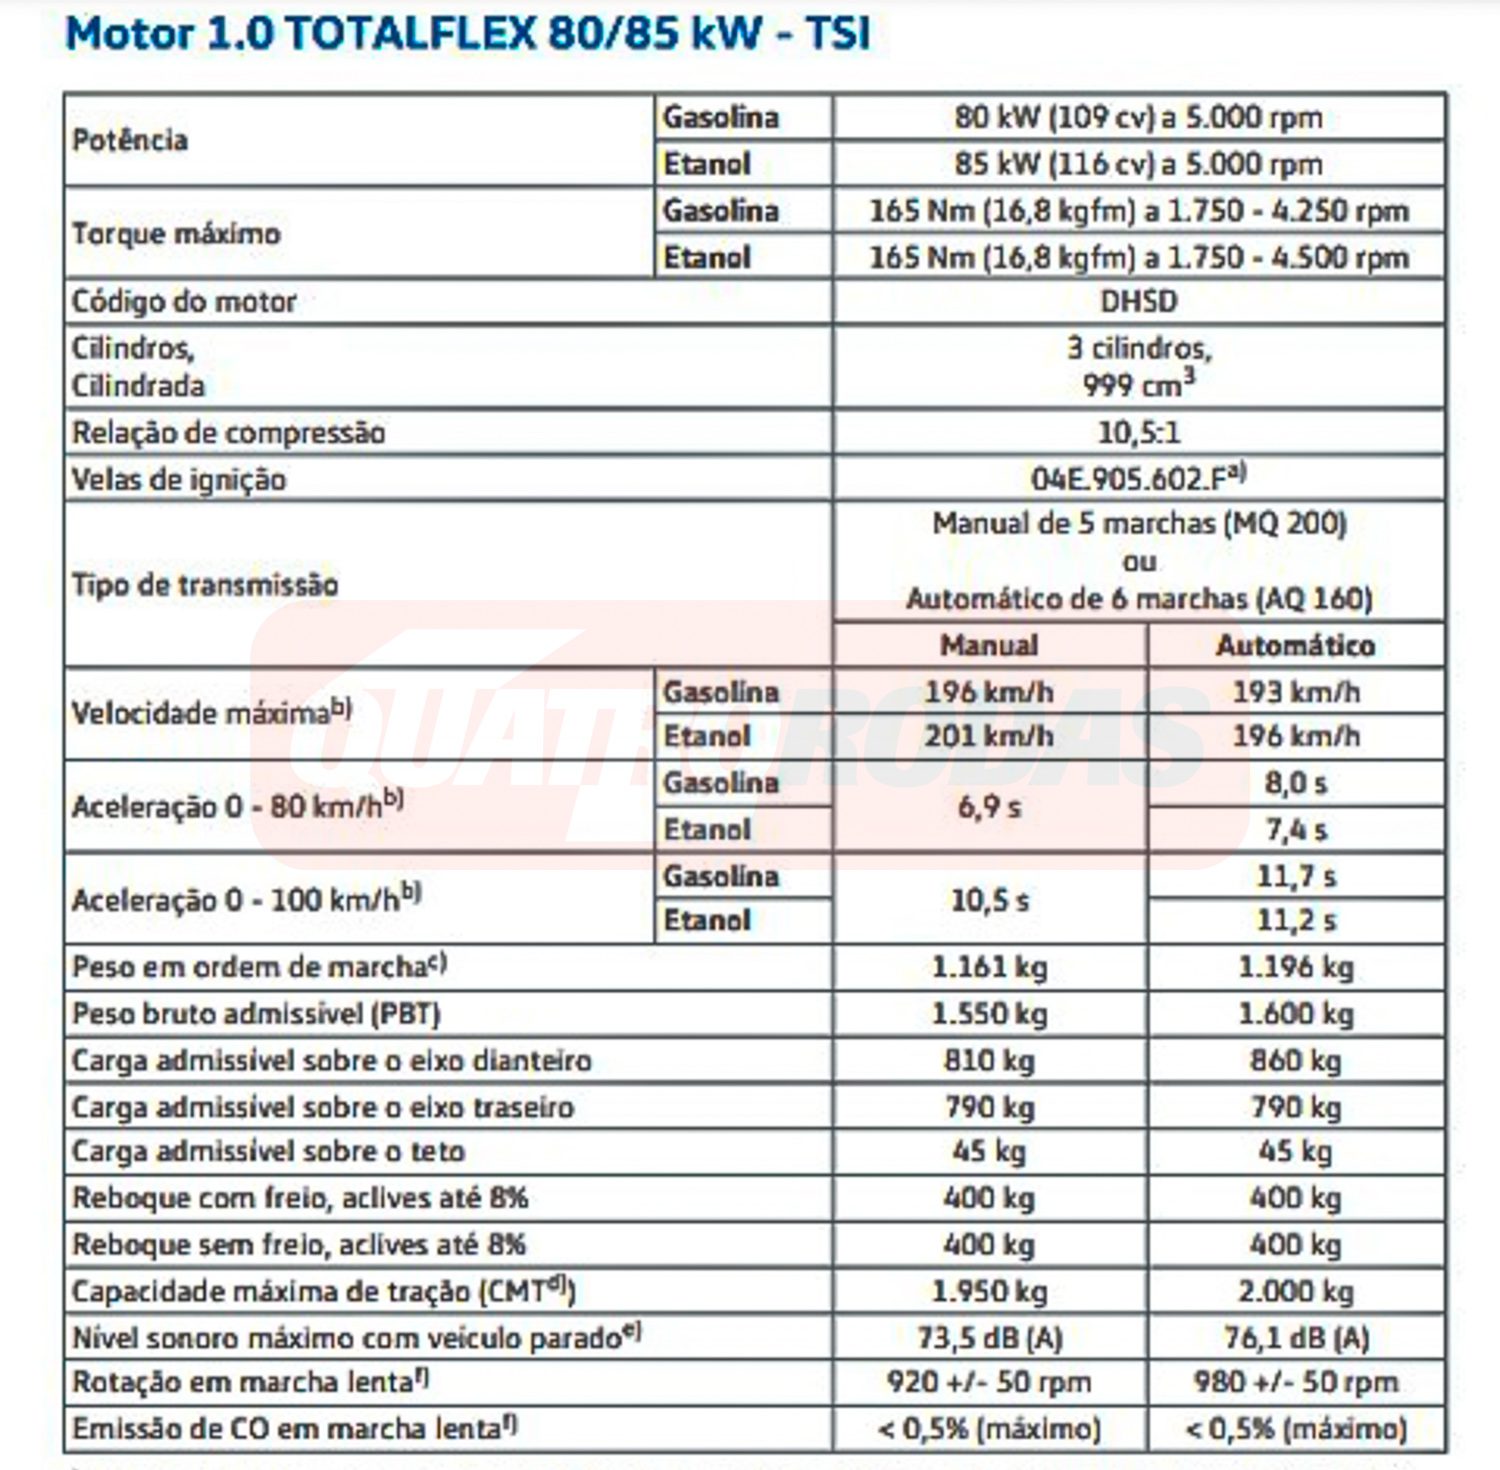 Technical sheet for Volkswagen Virtus TSI automatic and manual